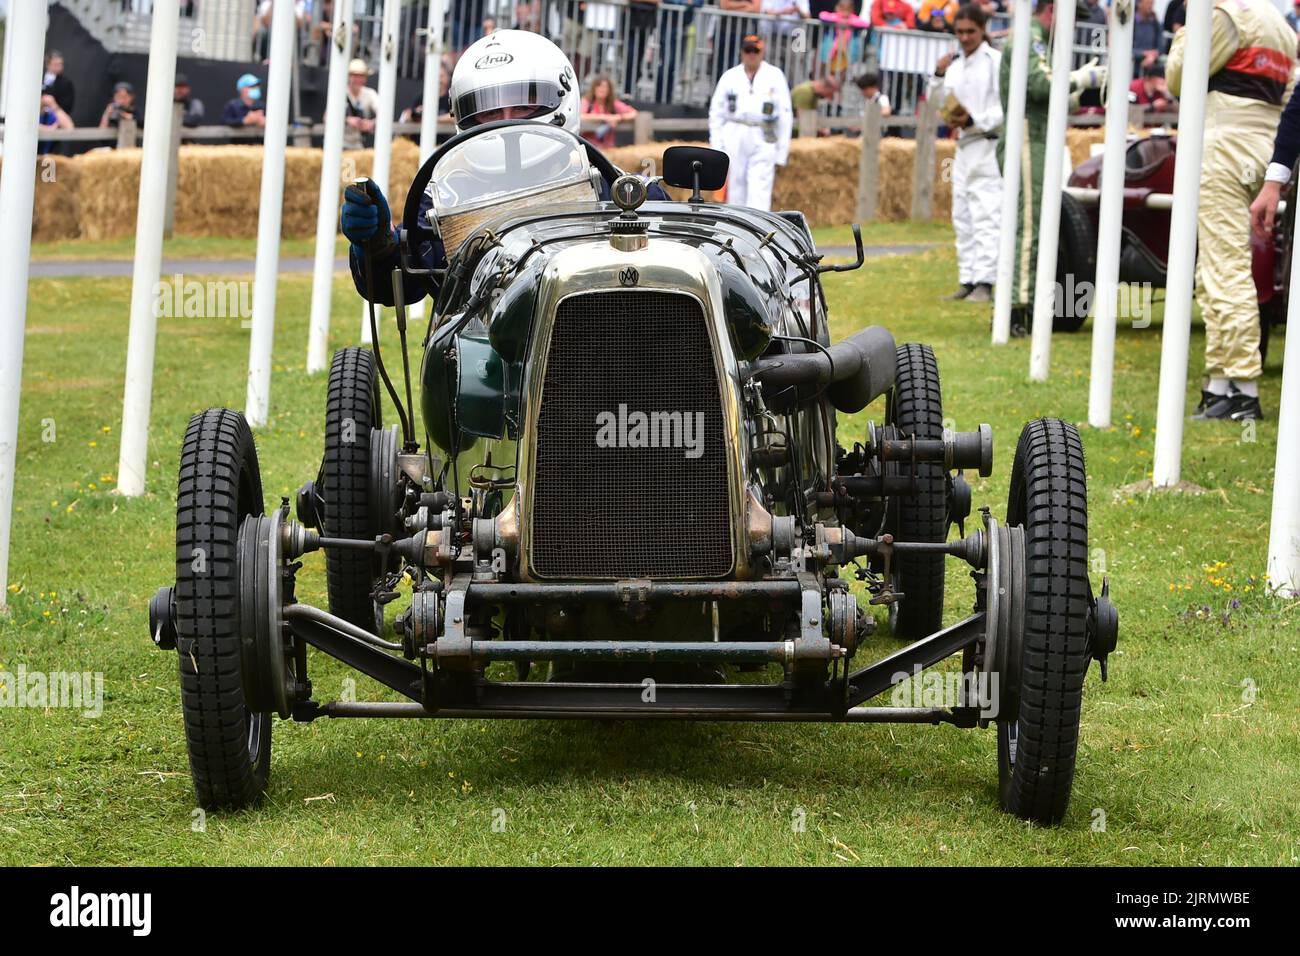 Robert Murray, Aston Martin Grand Prix 11hp, Green Pea, Pre-War Power, From the early twenties innovative technology of the period such as superchargi Stock Photo